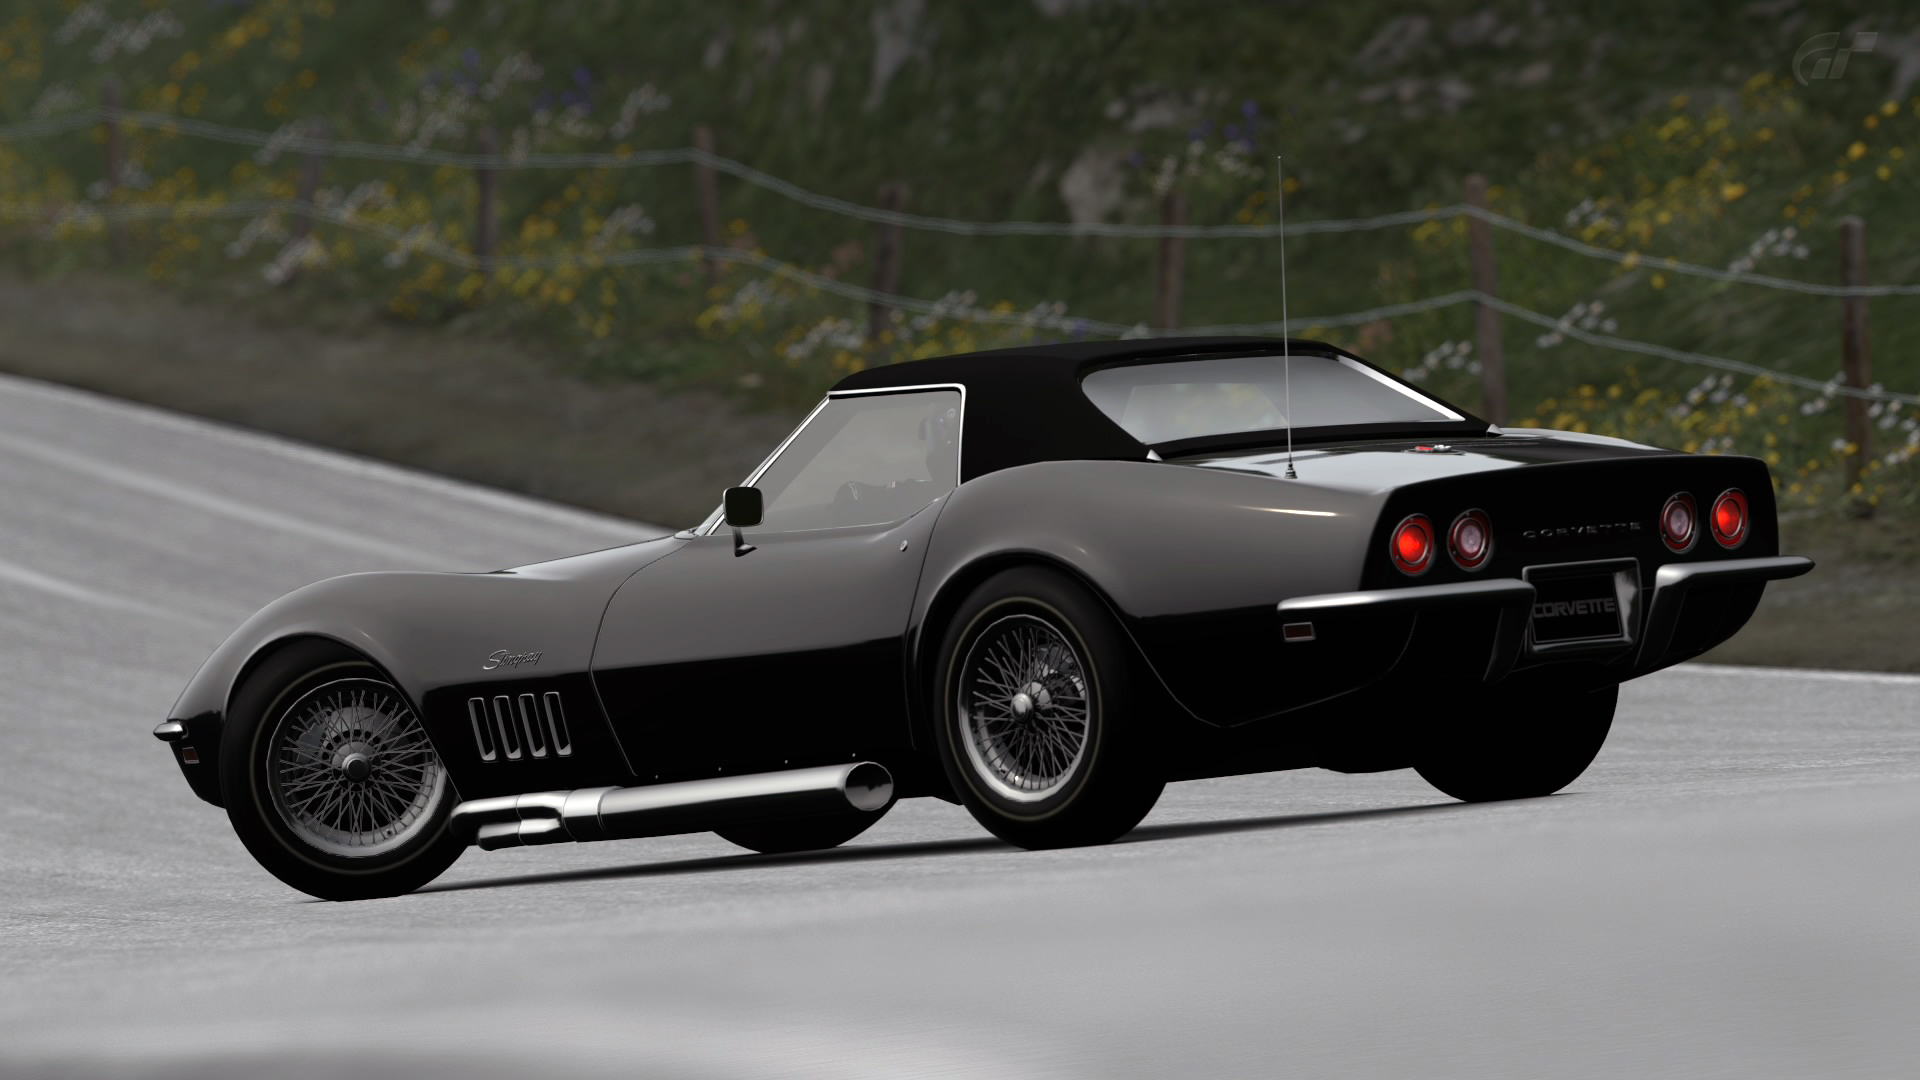 Chevy Corvette Stingray C3 Convertible Gt6 By Vertualissimo On